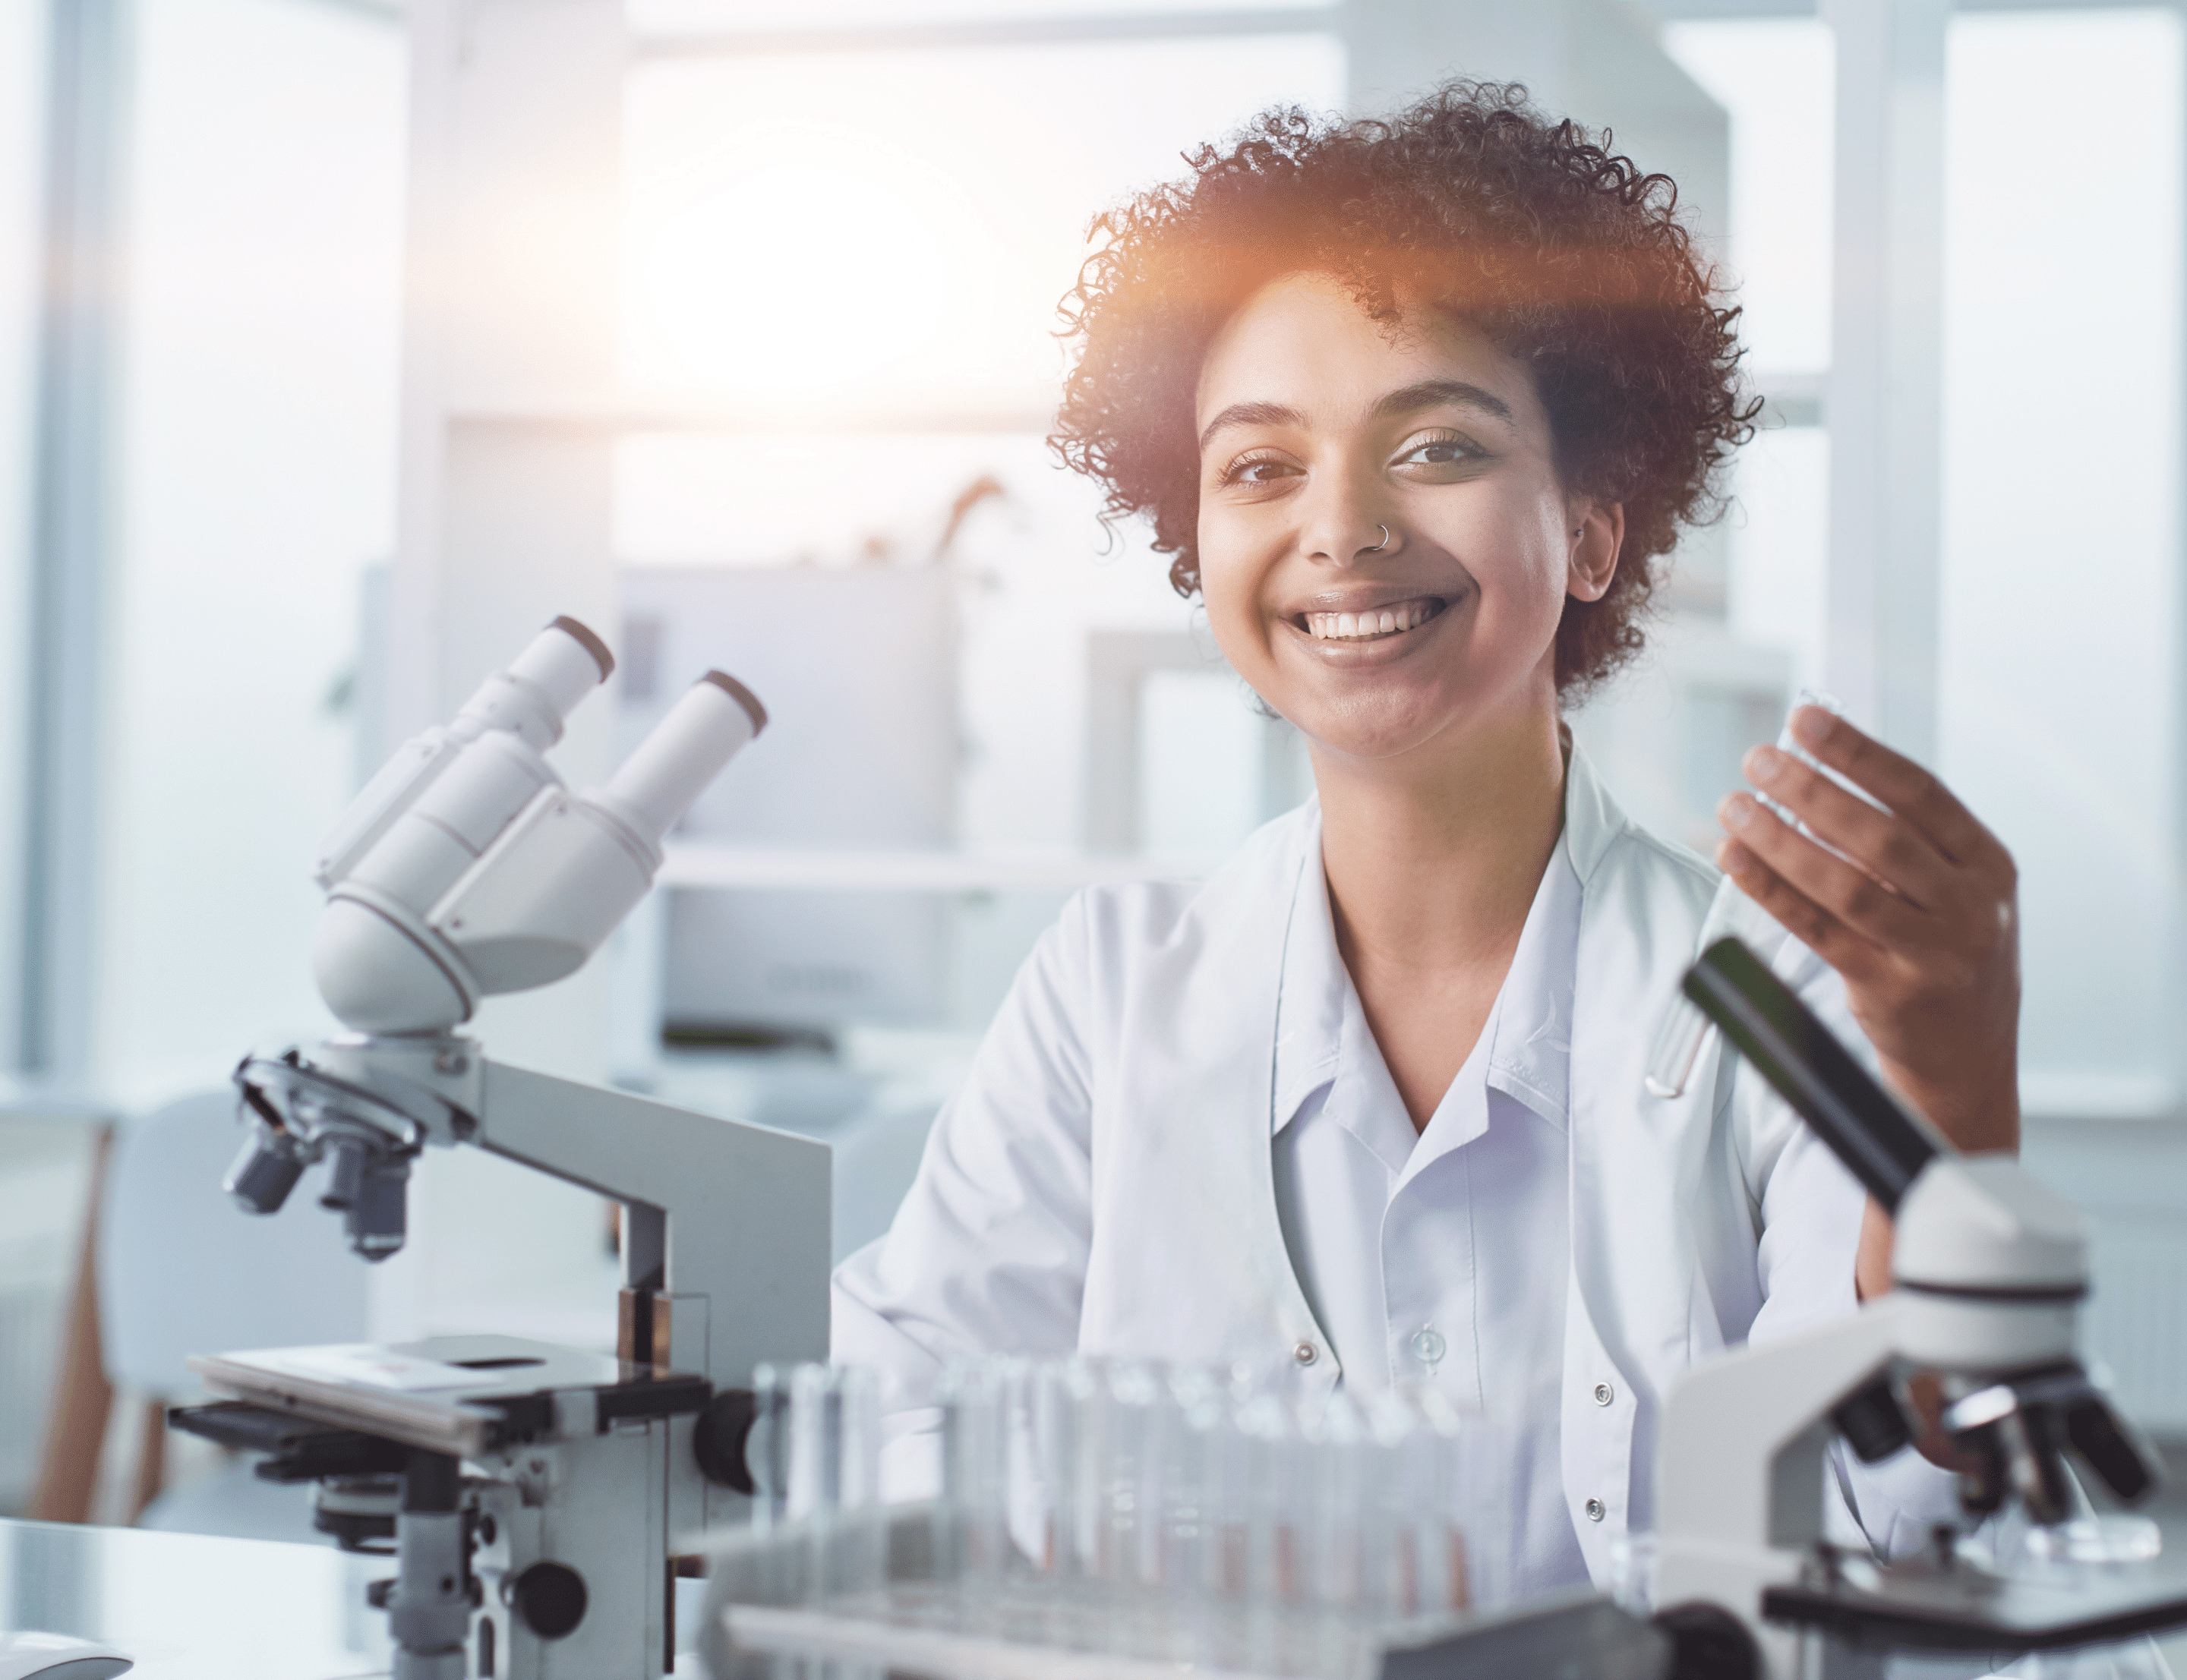 Medical Research Laboratory. Female Scientist Working with Micro